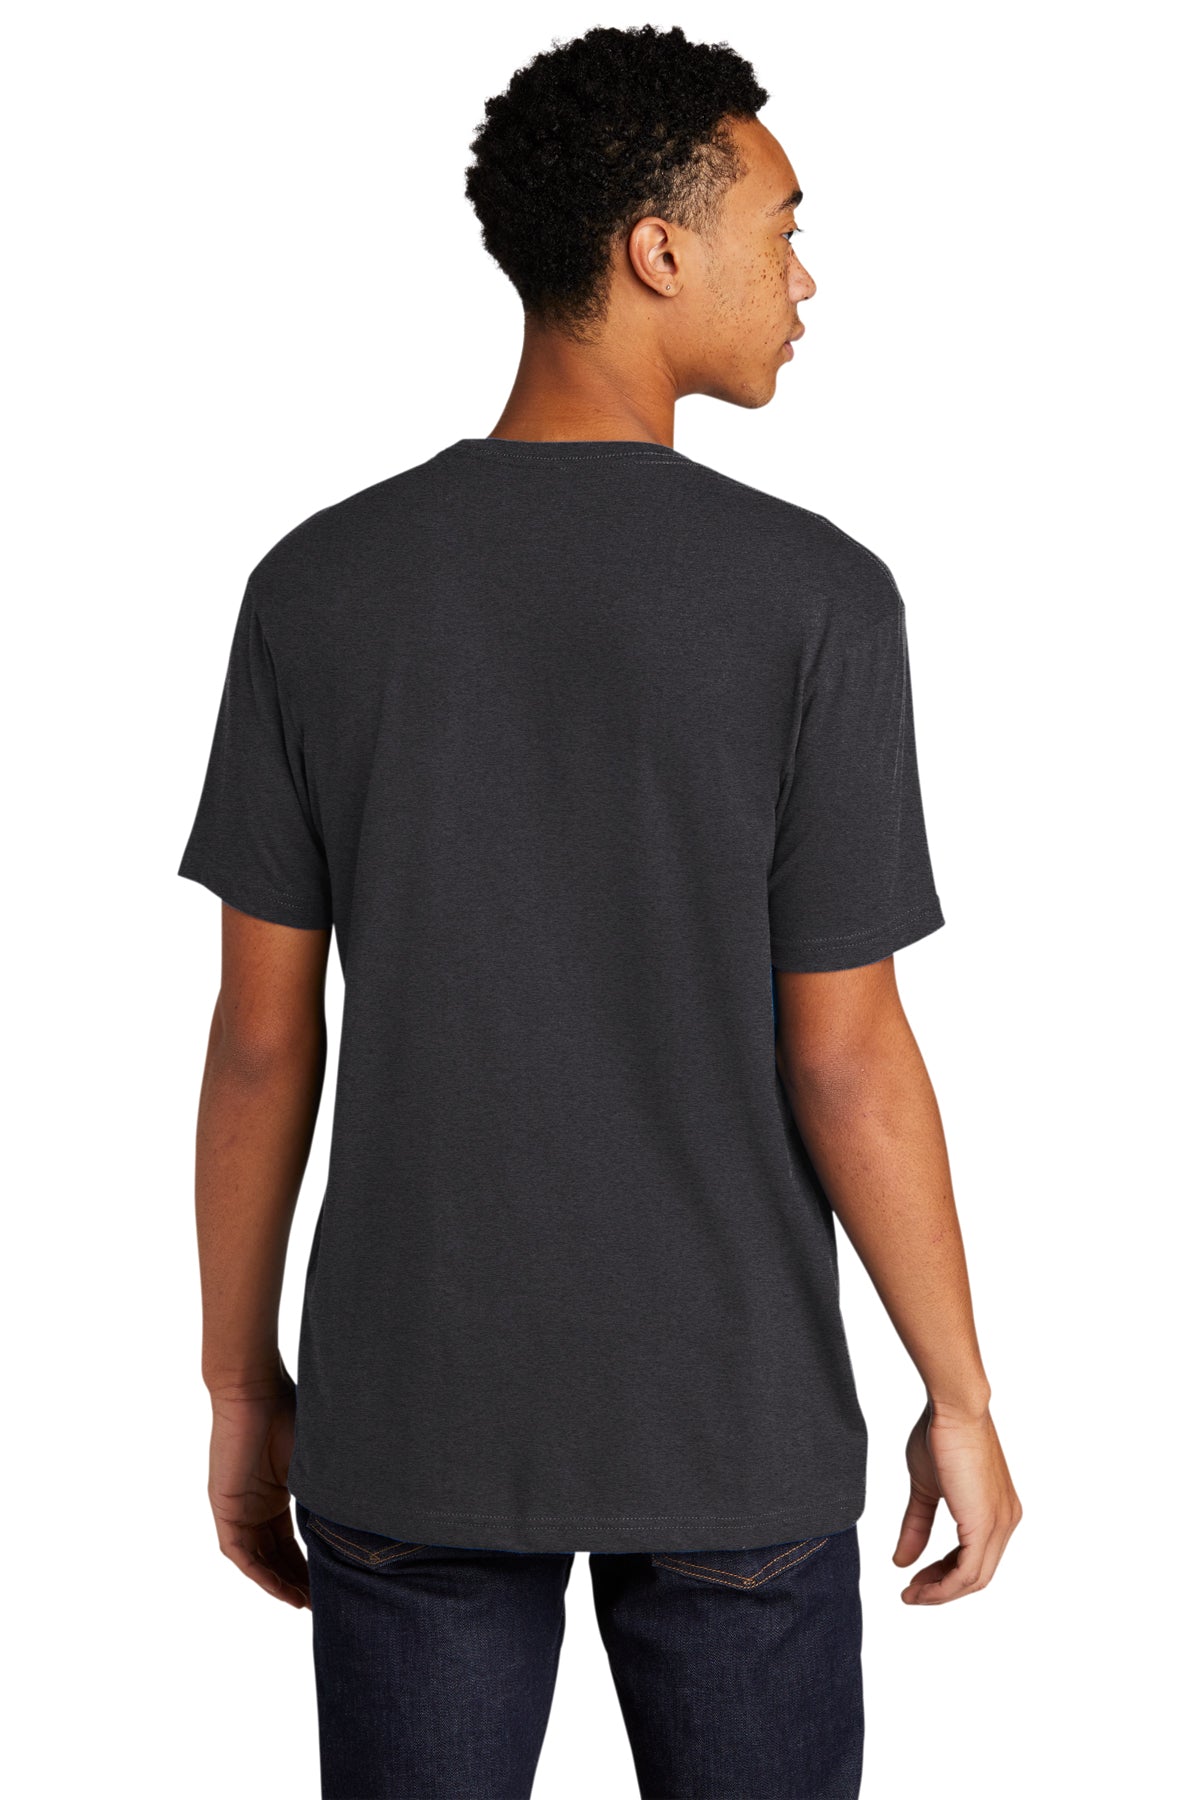 Next Level Unisex CVC Sueded Branded Tee's, Heather Charcoal